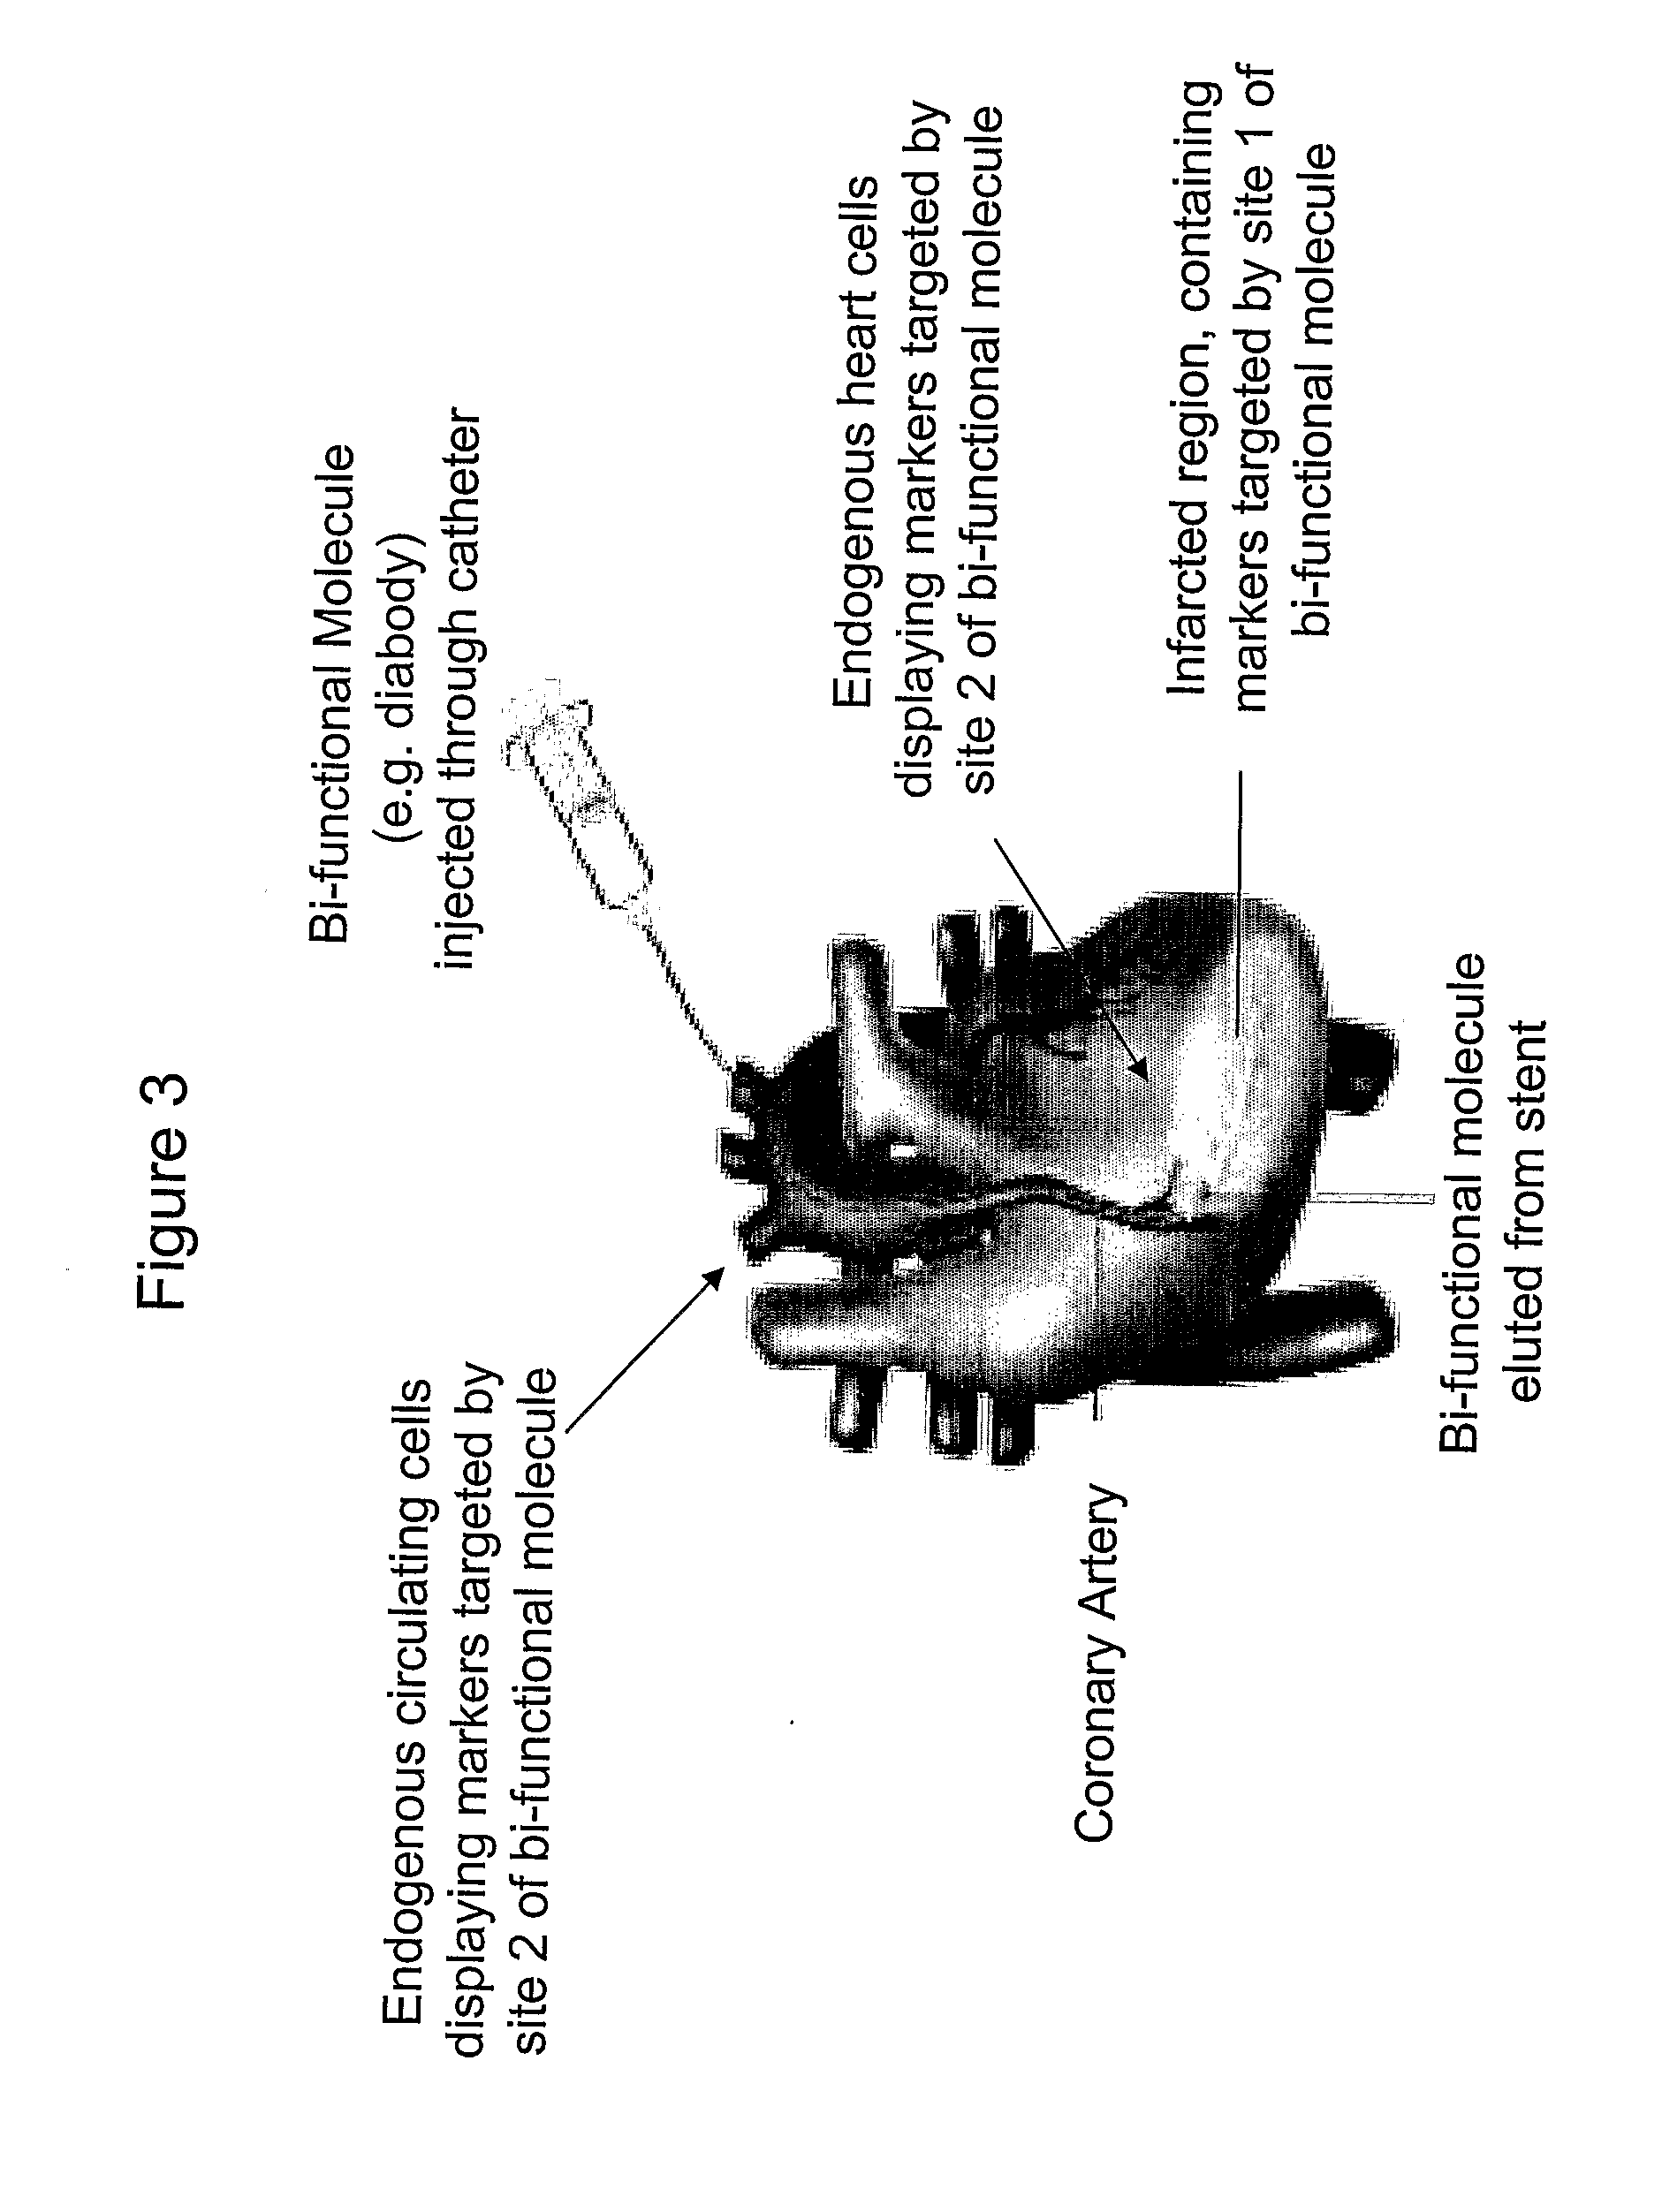 Methods of treating and preventing acute myocardial infarction